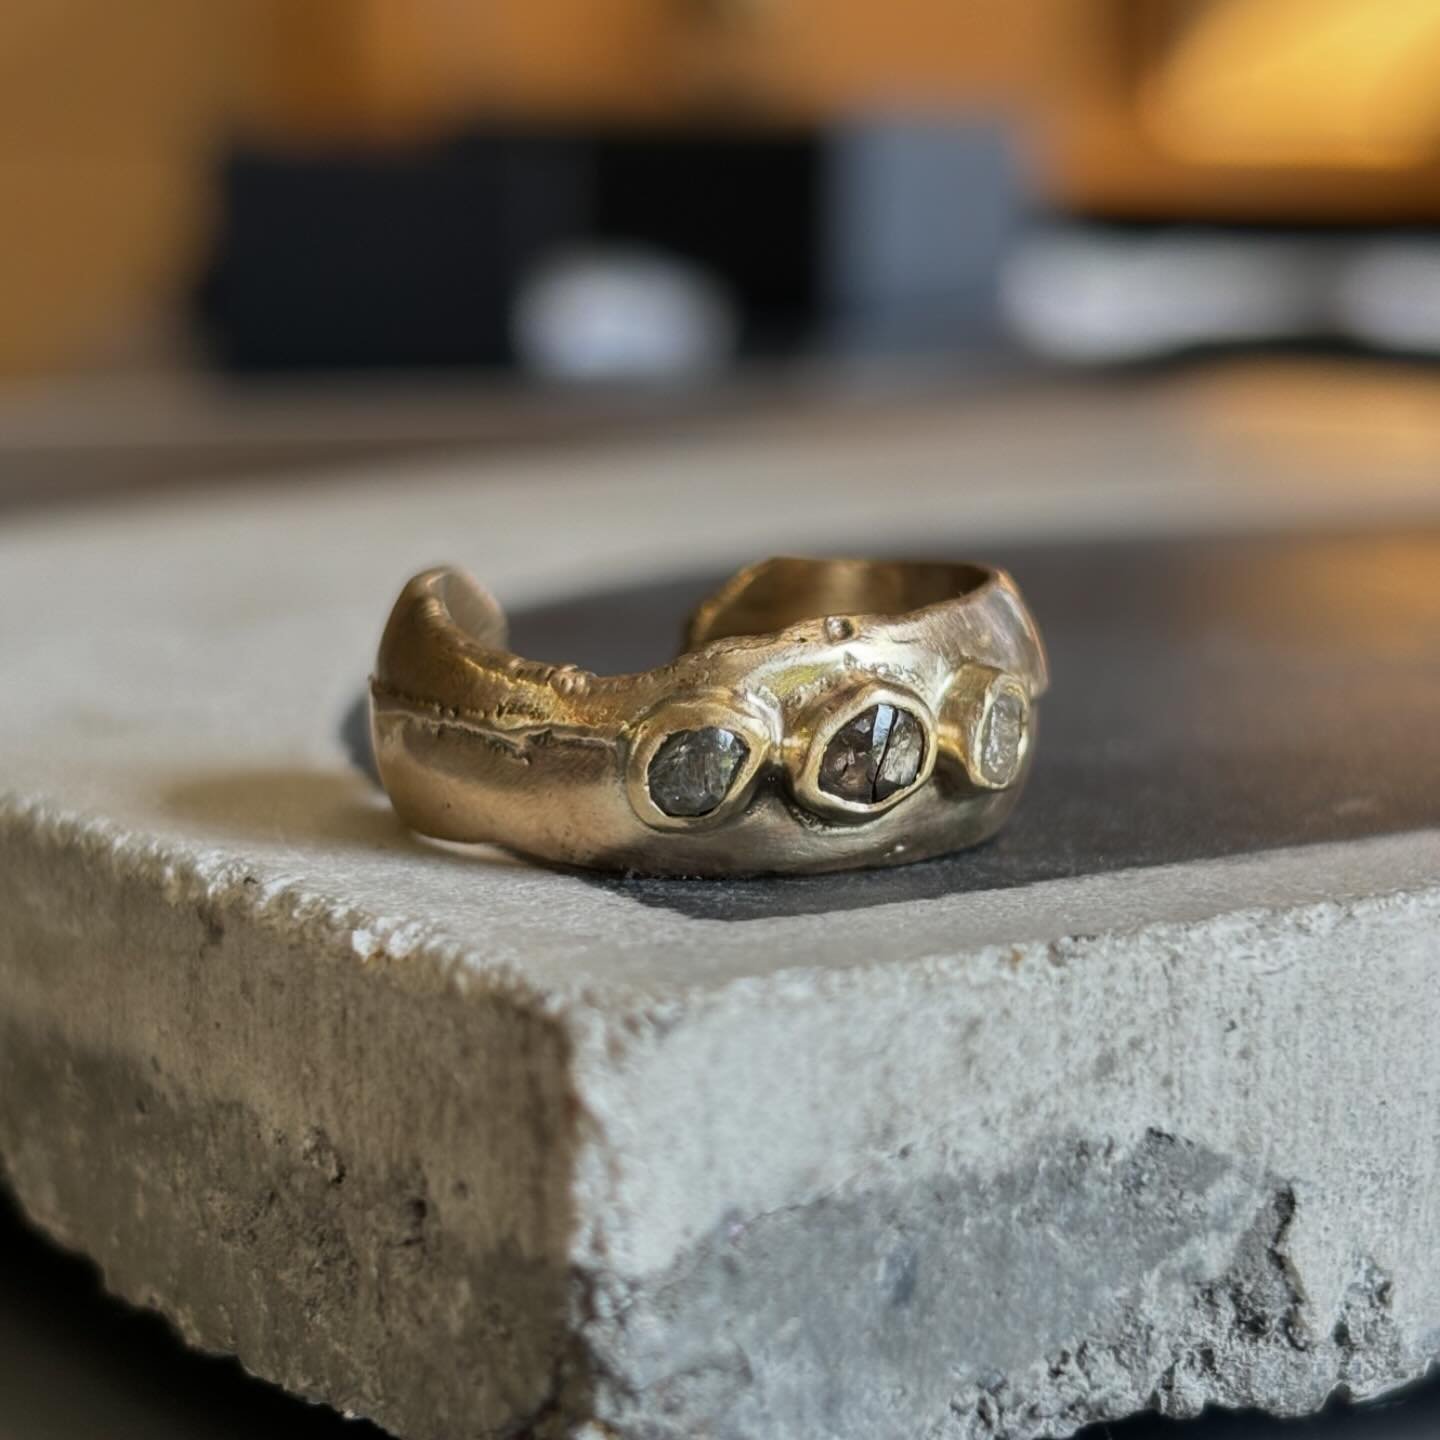 Made for one of my best pals, this raw diamond ring was sand cast in house using scrap gold and diamonds she had already. I wanted to let the cast determine the design, so the seam and incomplete edges have been left untouched. I described it to my f